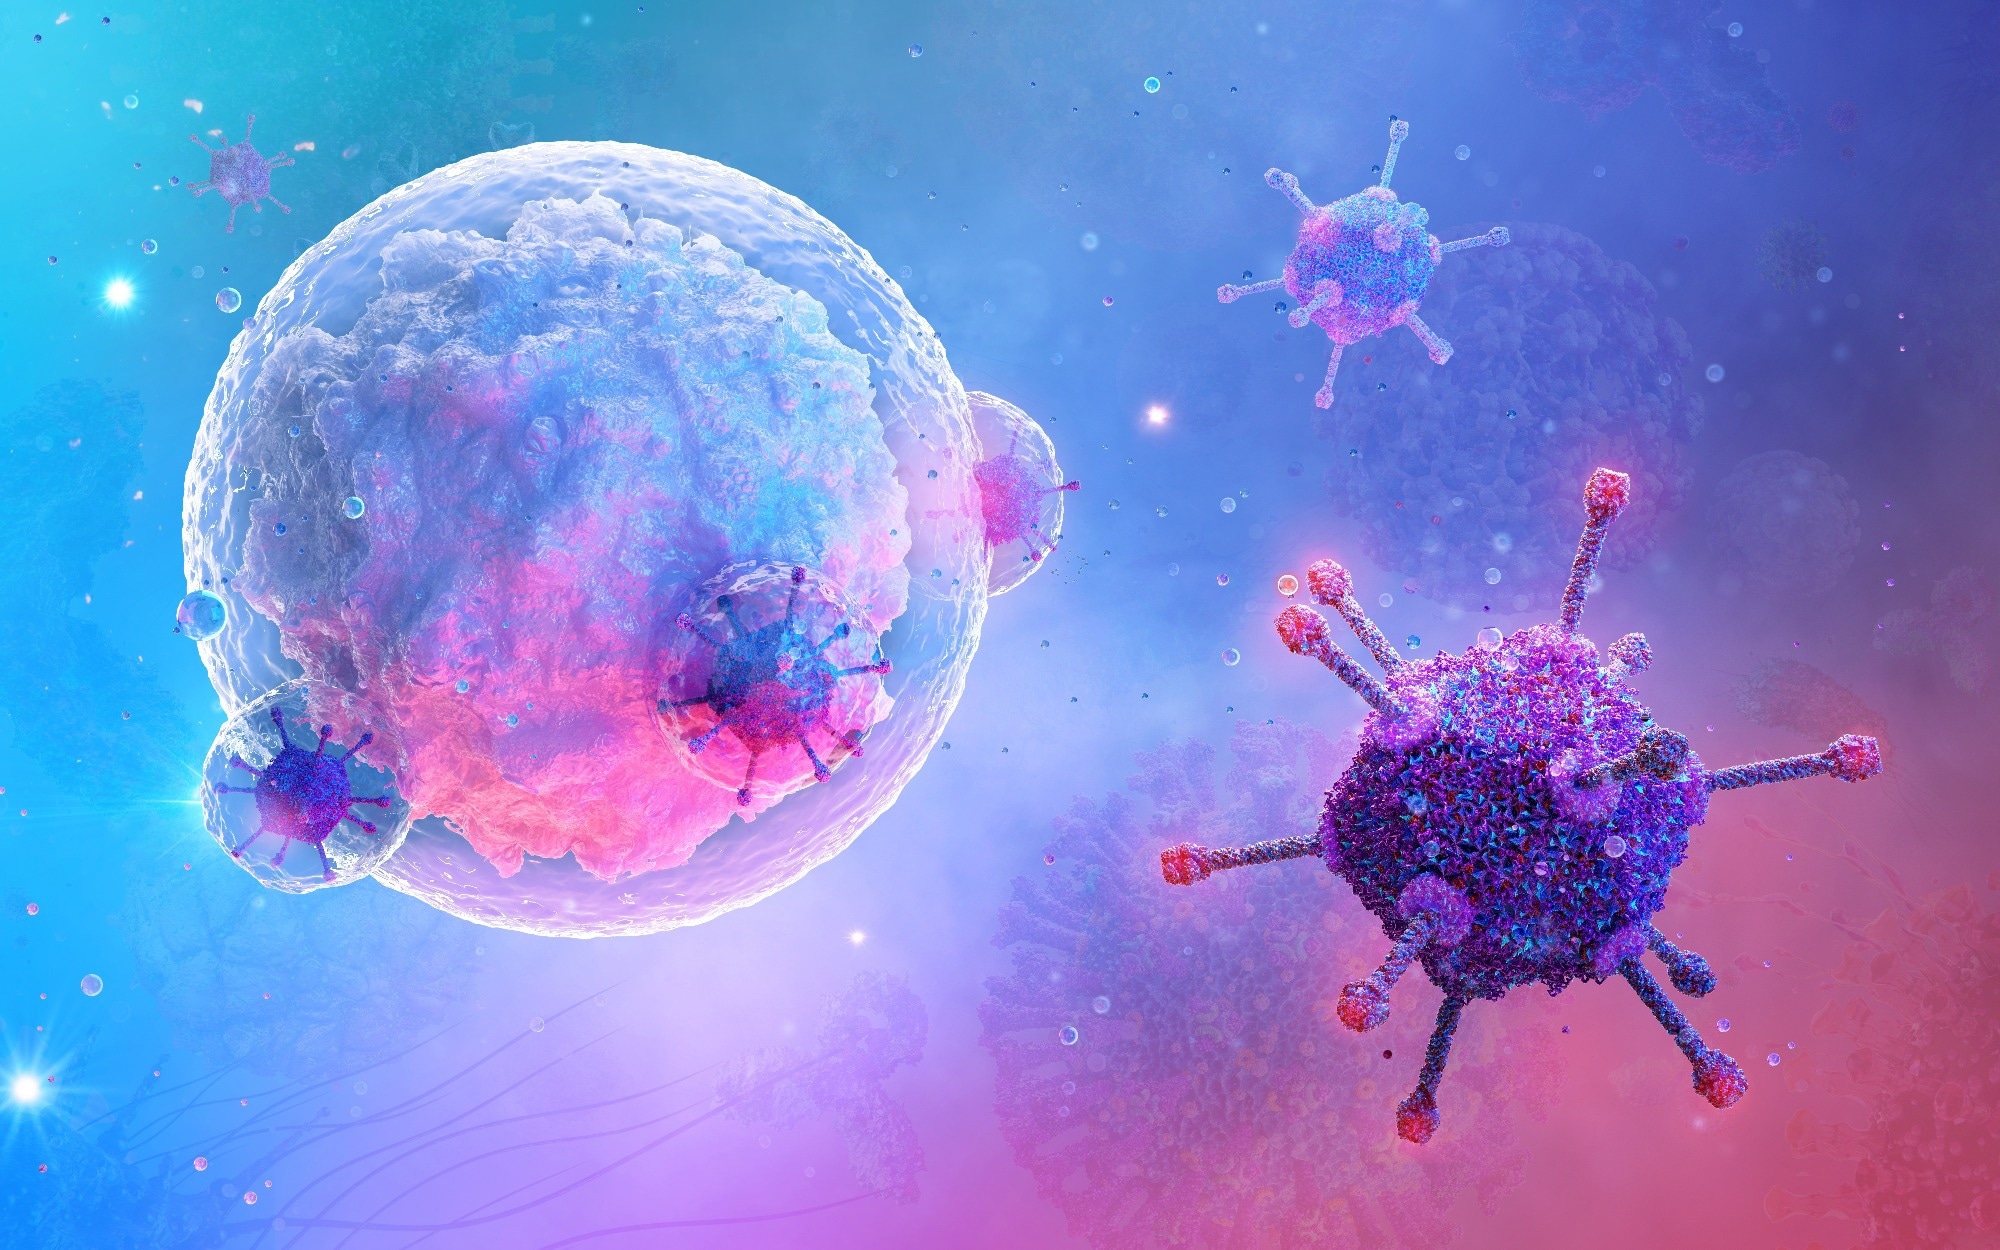 Study: Persistent humoral immunity in children and adolescents throughout the COVID-19 pandemic (June 2020 to July 2022): a prospective school-based cohort study (Ciao Corona) in Switzerland. Image Credit: oronaBorealis Studio/Shutterstock.com